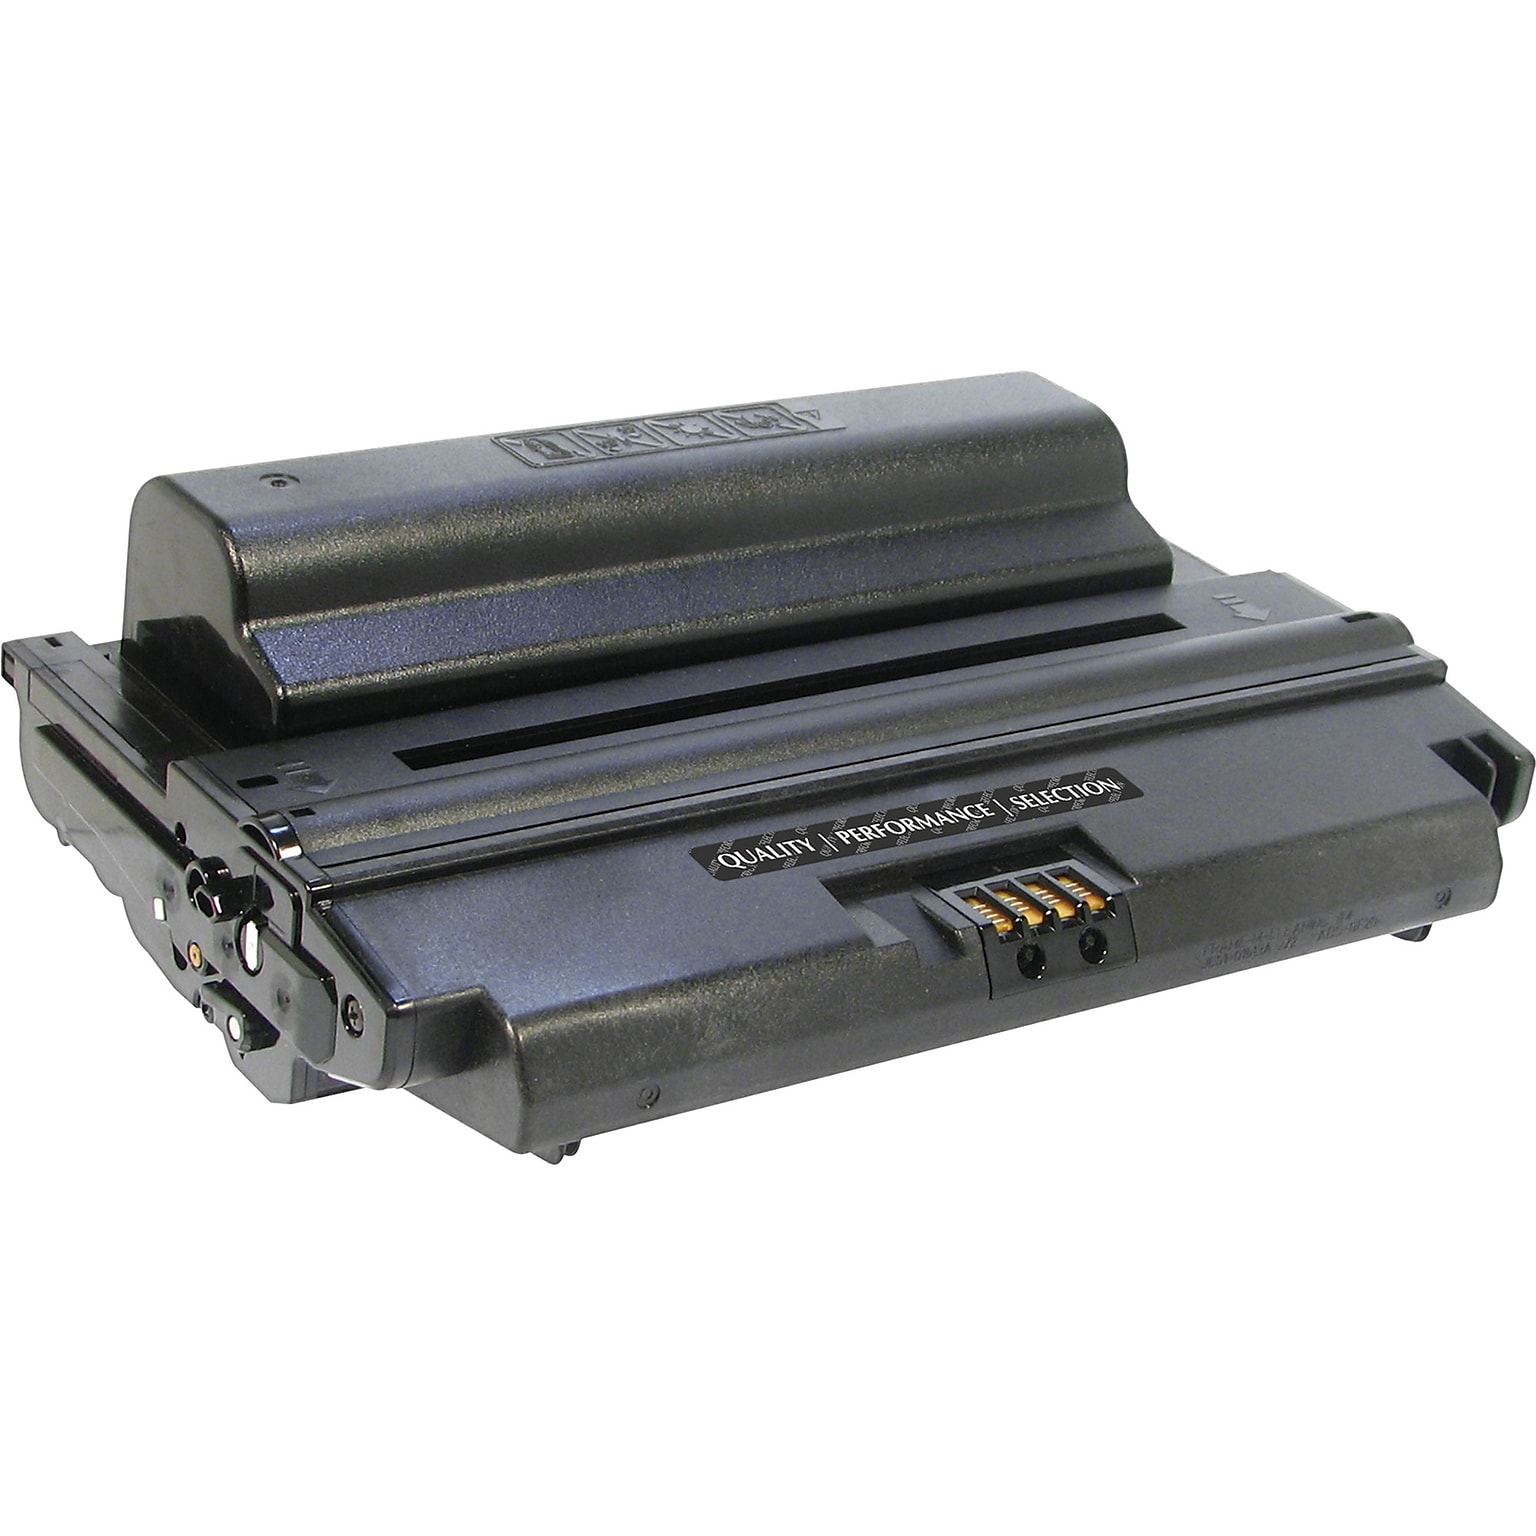 Quill Brand High Yield Toner Cartridge Comparable to Xerox® 108R00795 Black (100% Satisfaction Guaranteed)